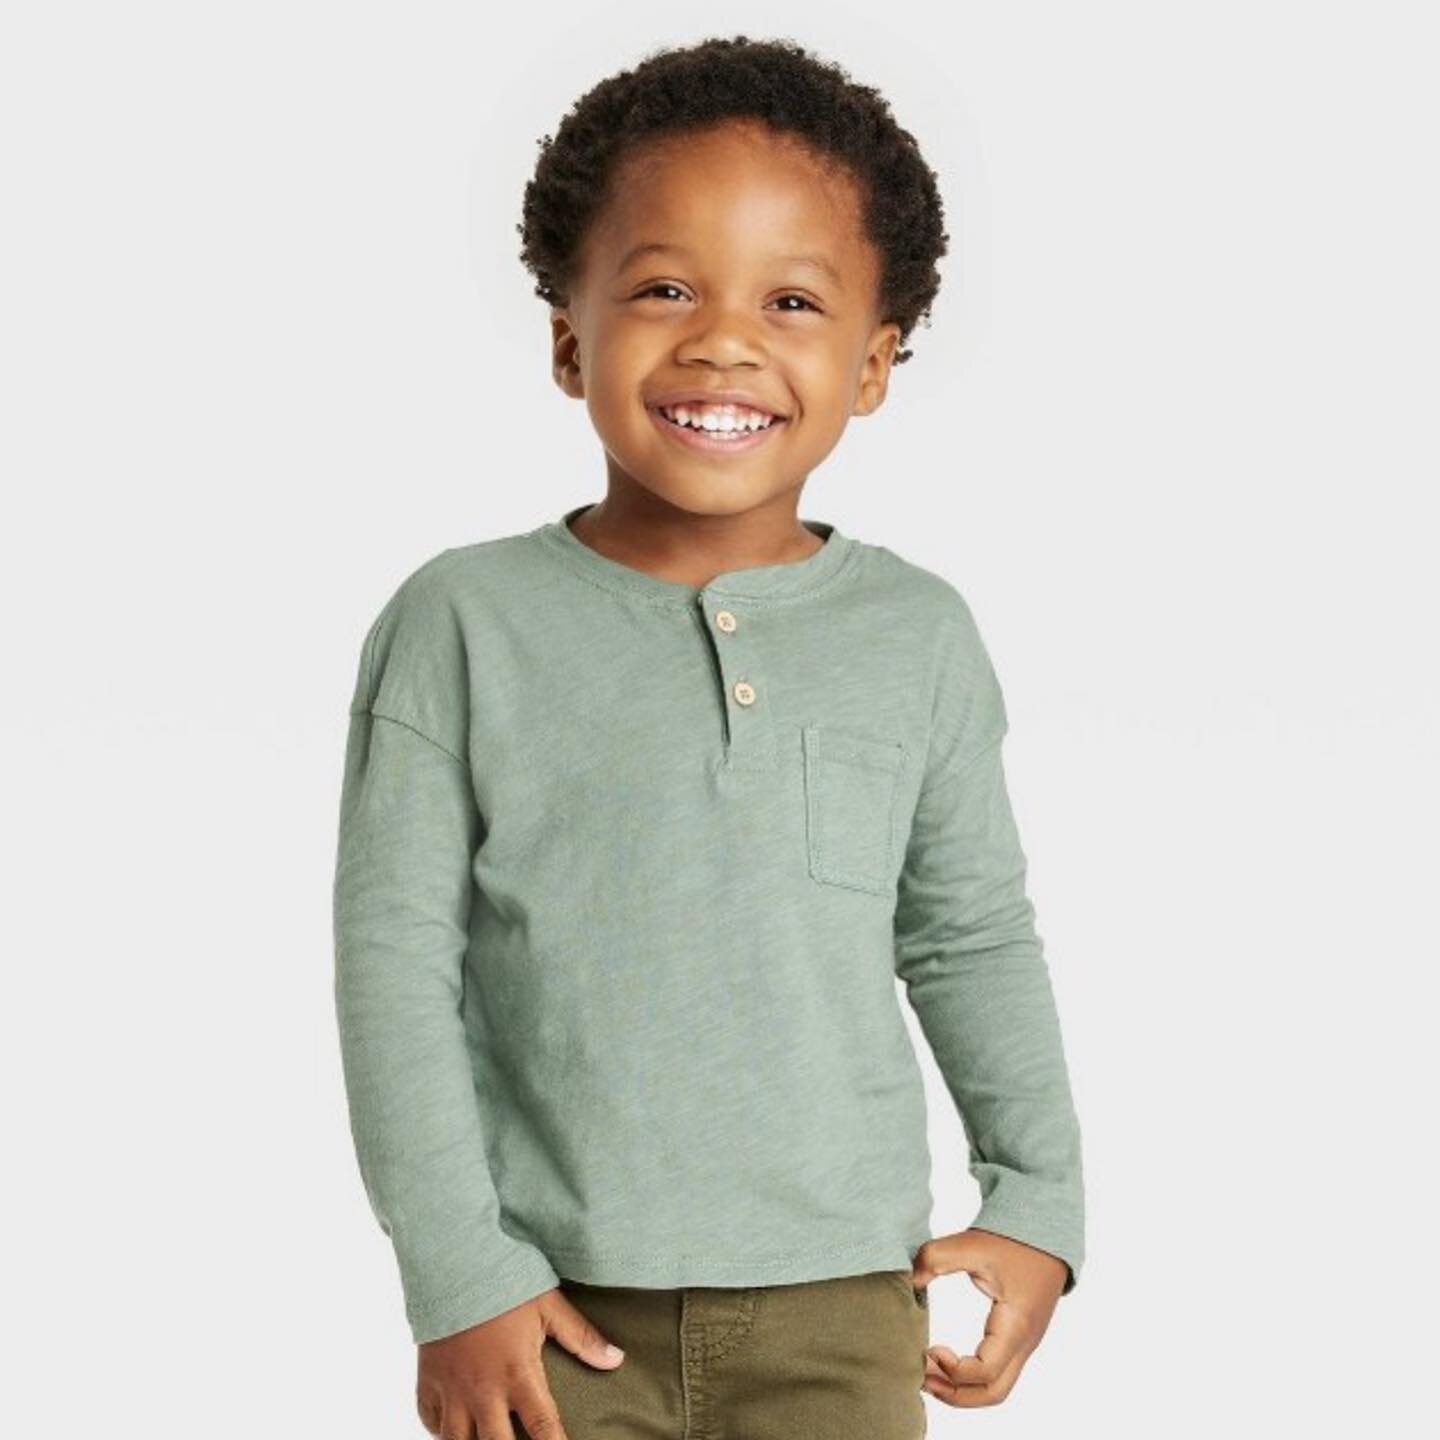 We love Grayson Mini&rsquo;s henleys!! 

shop Grayson Mini on Target.com or in select stores
@targetstyle  @target 
#graysonthreads #graysonmini #targetstyle #sweaterweather #graysonstyle #cozyclothes #sweatshirtweather 
#fallstyle #ootd #fall #grays